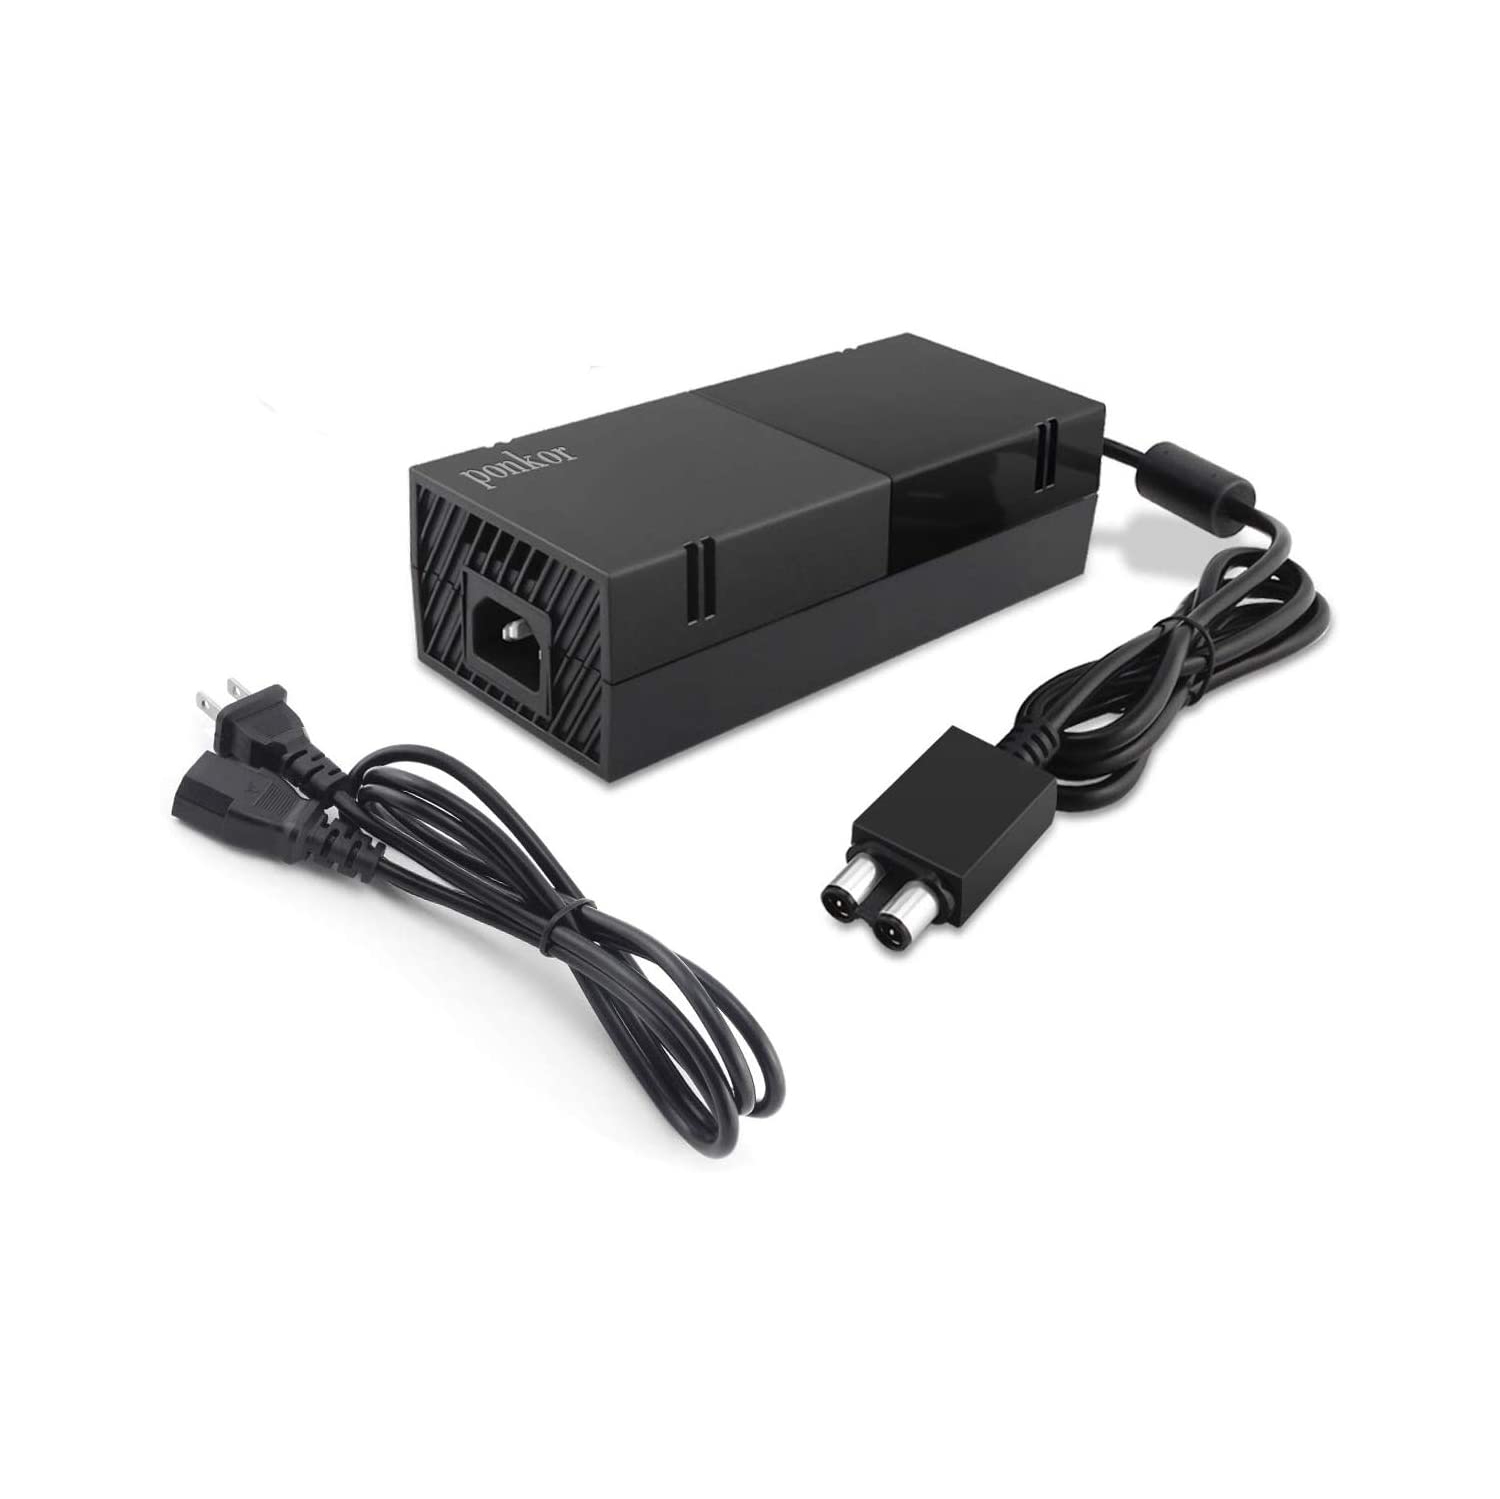 Xbox One Power Brick,Ponkor Xbox 1 AC Adapter Power Cord Replacement Charger for Microsoft Xbox one 100-240V, Black